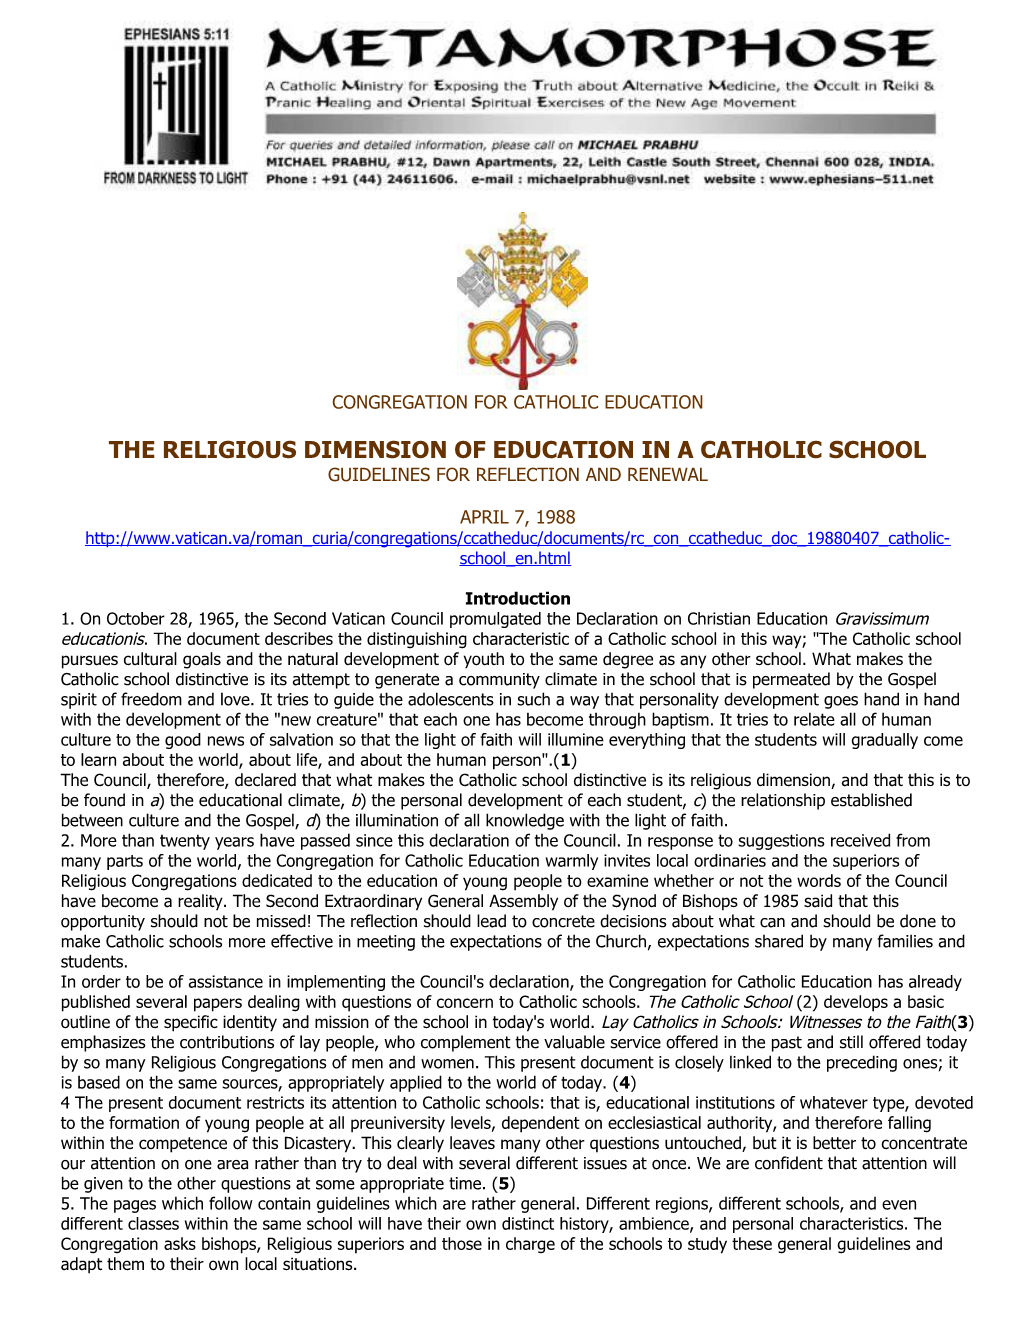 The Religious Dimension of Education in a Catholic School